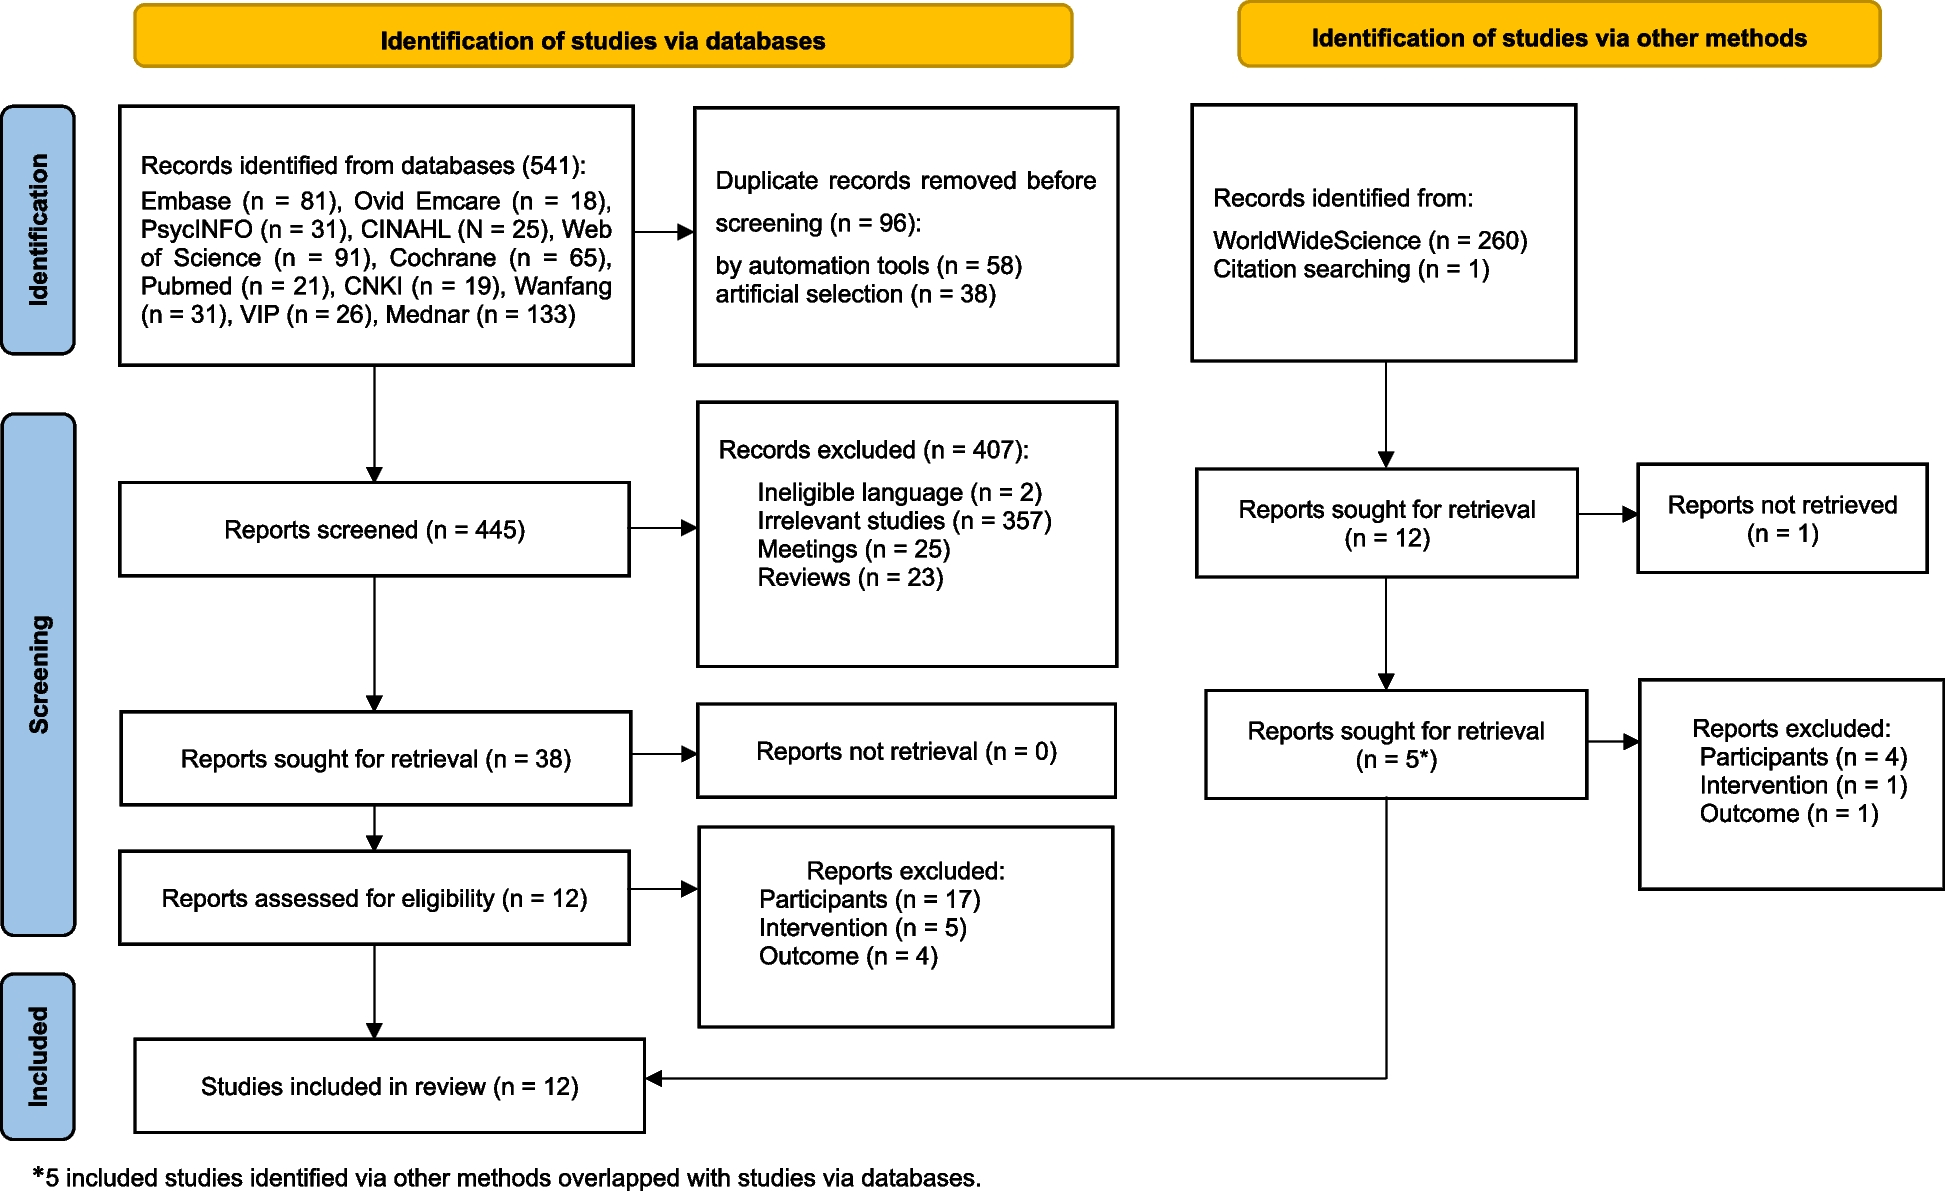 Effect of mindfulness-based interventions on people with prehypertension or hypertension: a systematic review and meta-analysis of randomized controlled trials